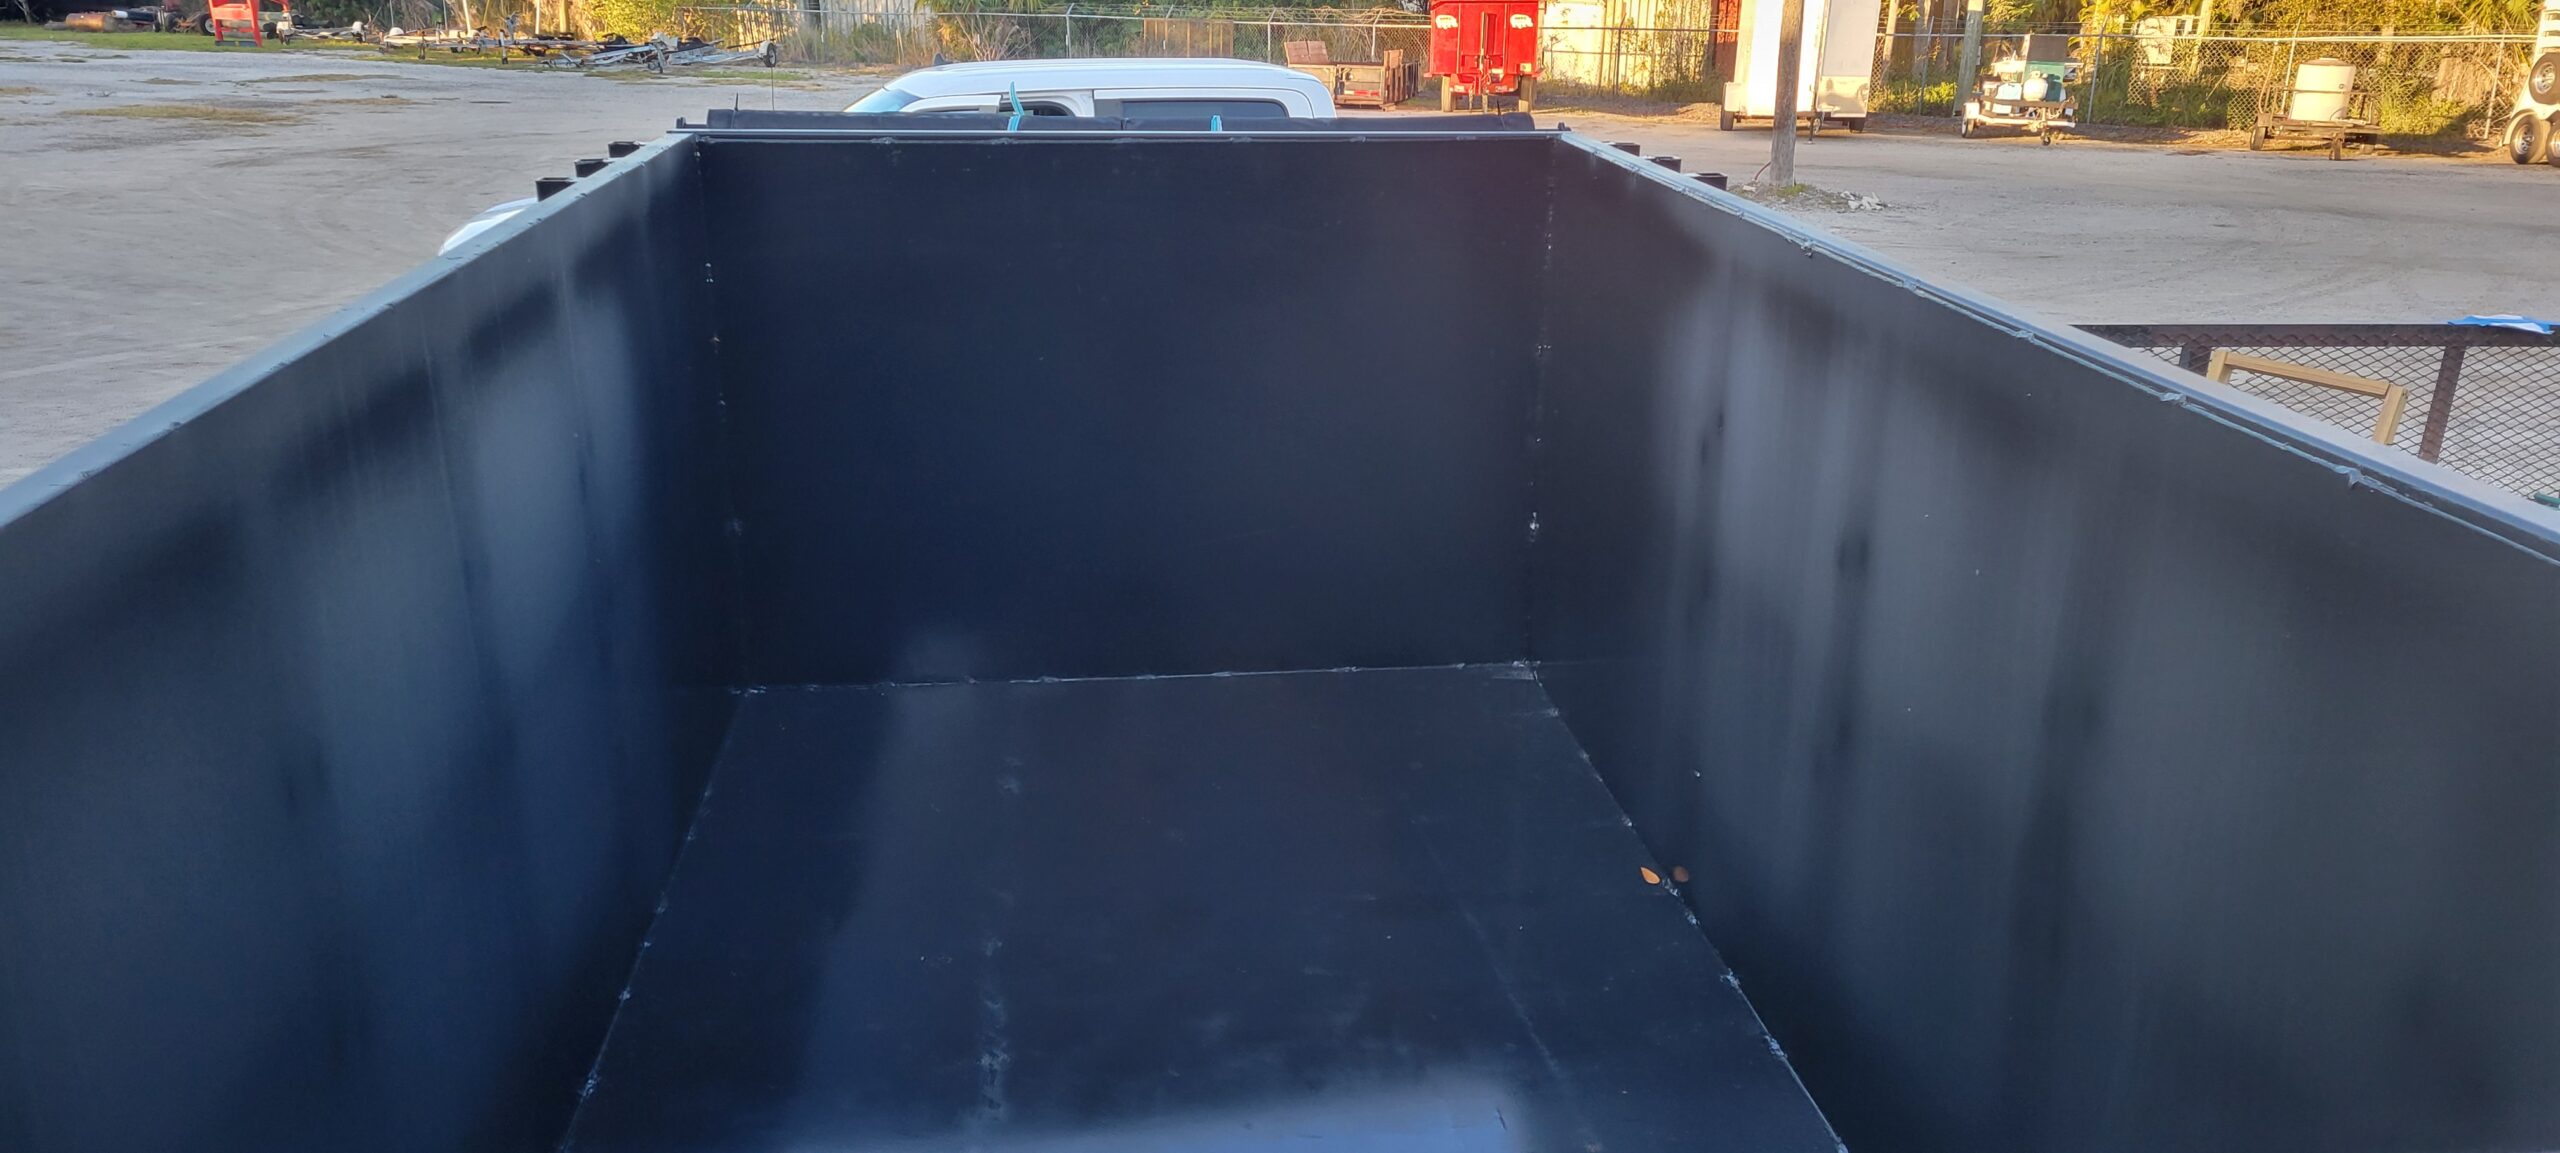 new paint for dump trailer bed scaled